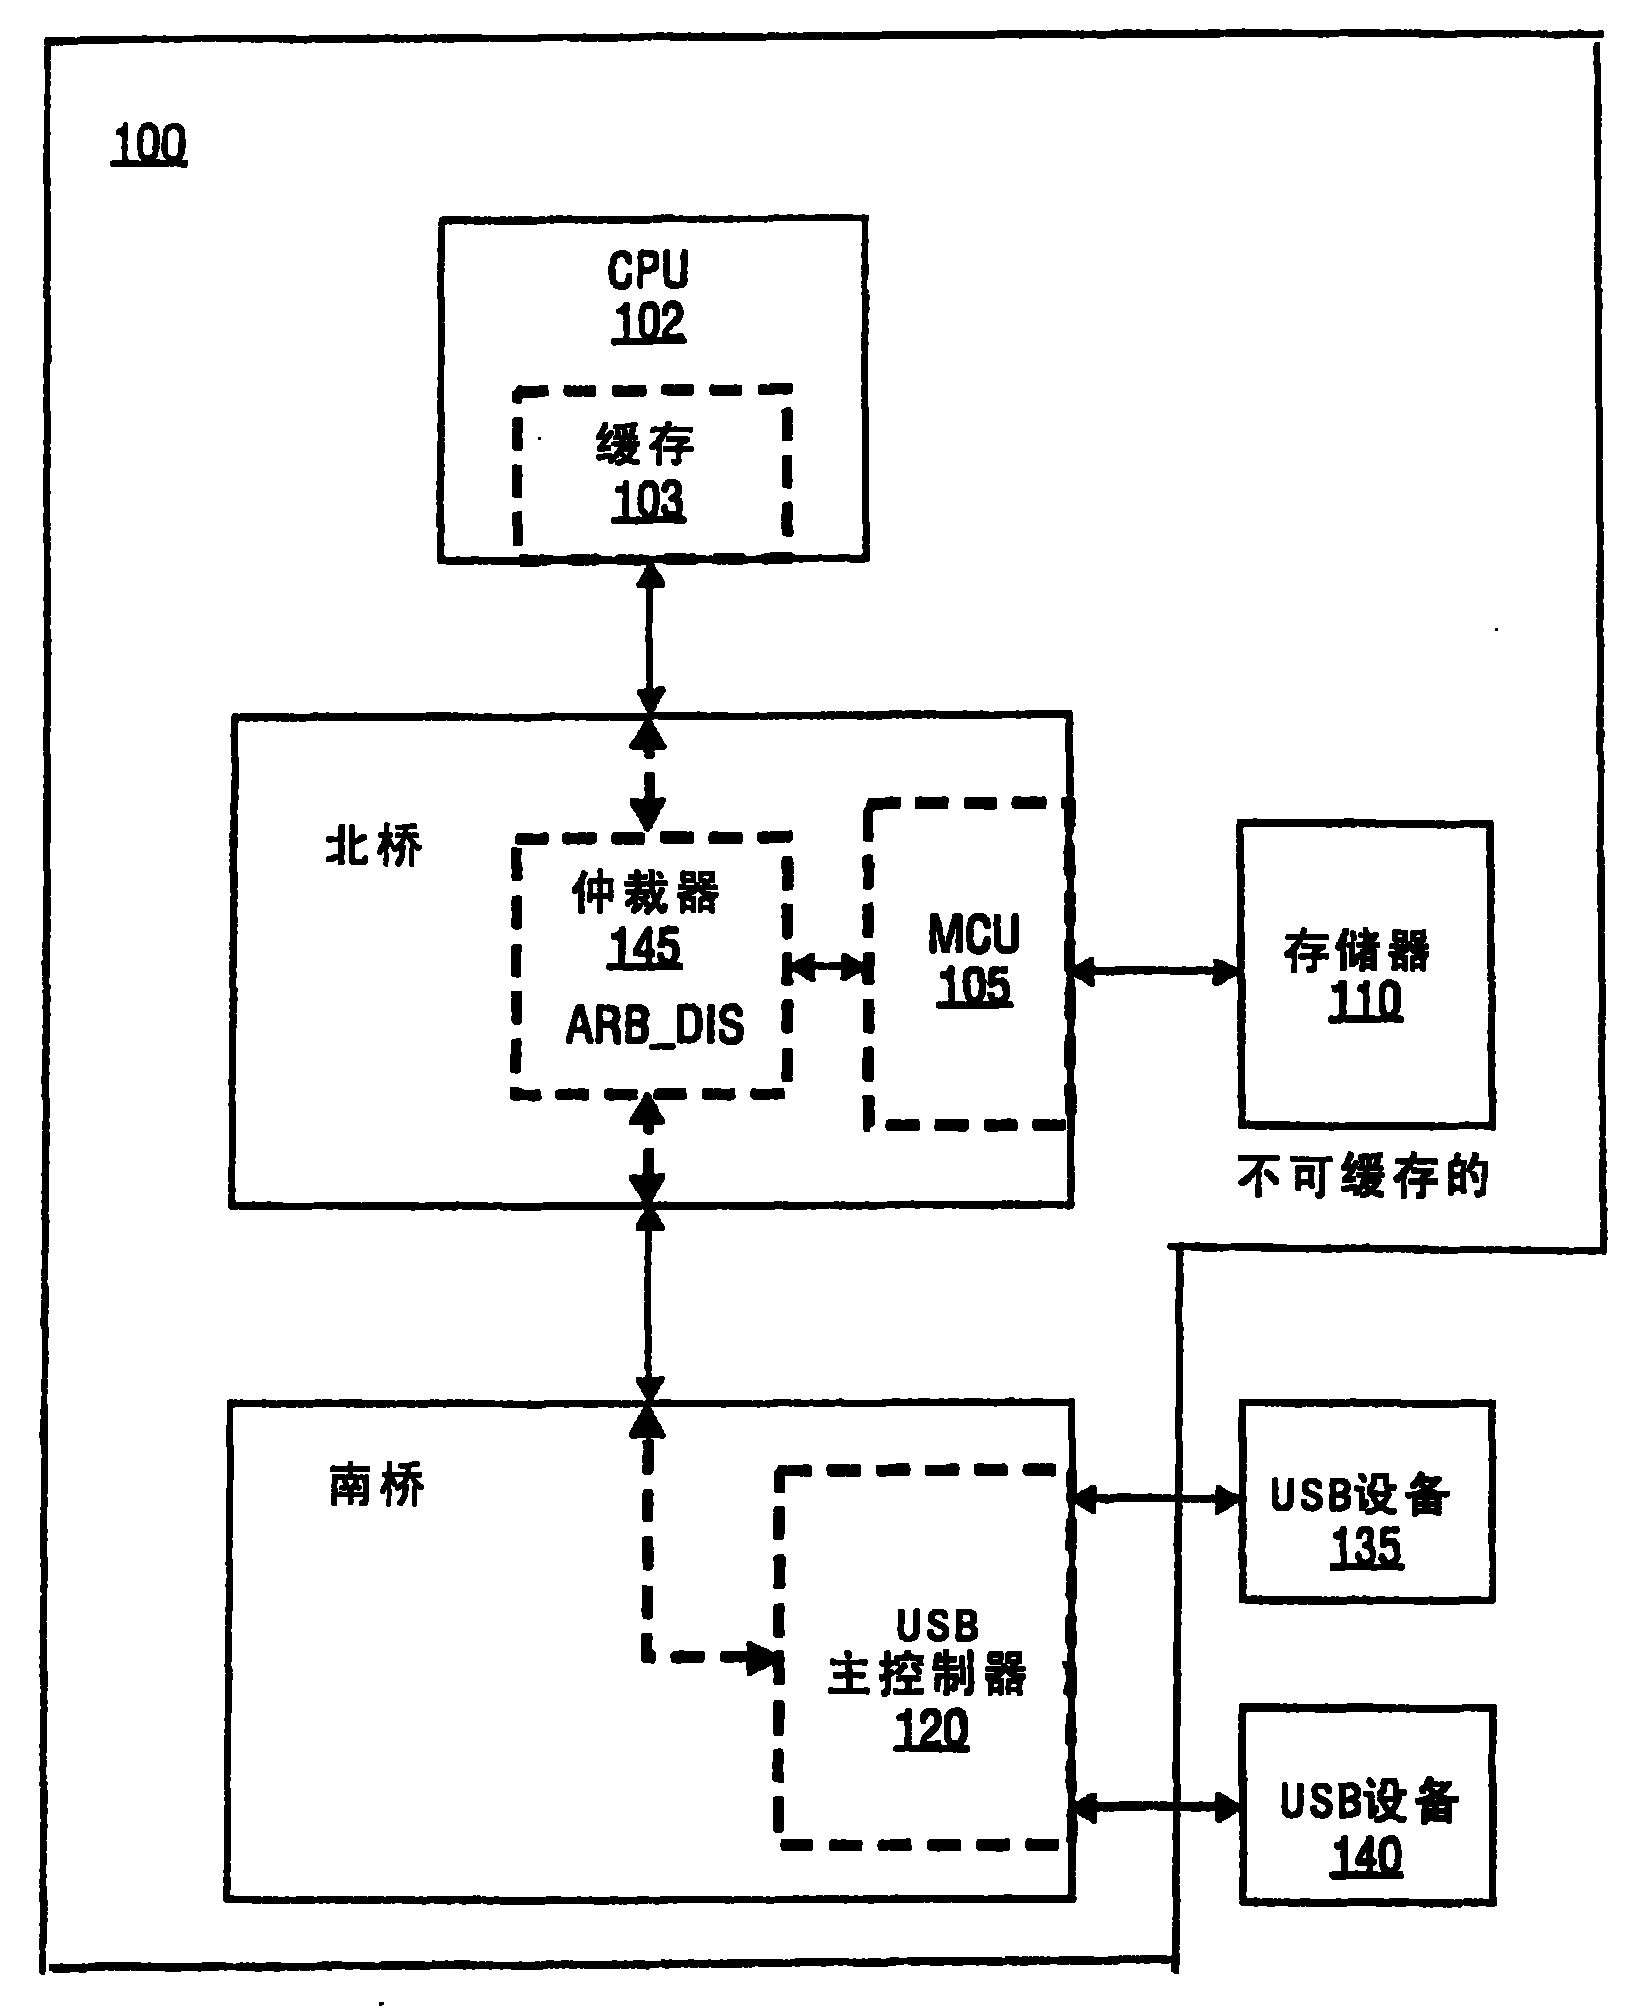 Method to reduce power in a computer system with bus master devices